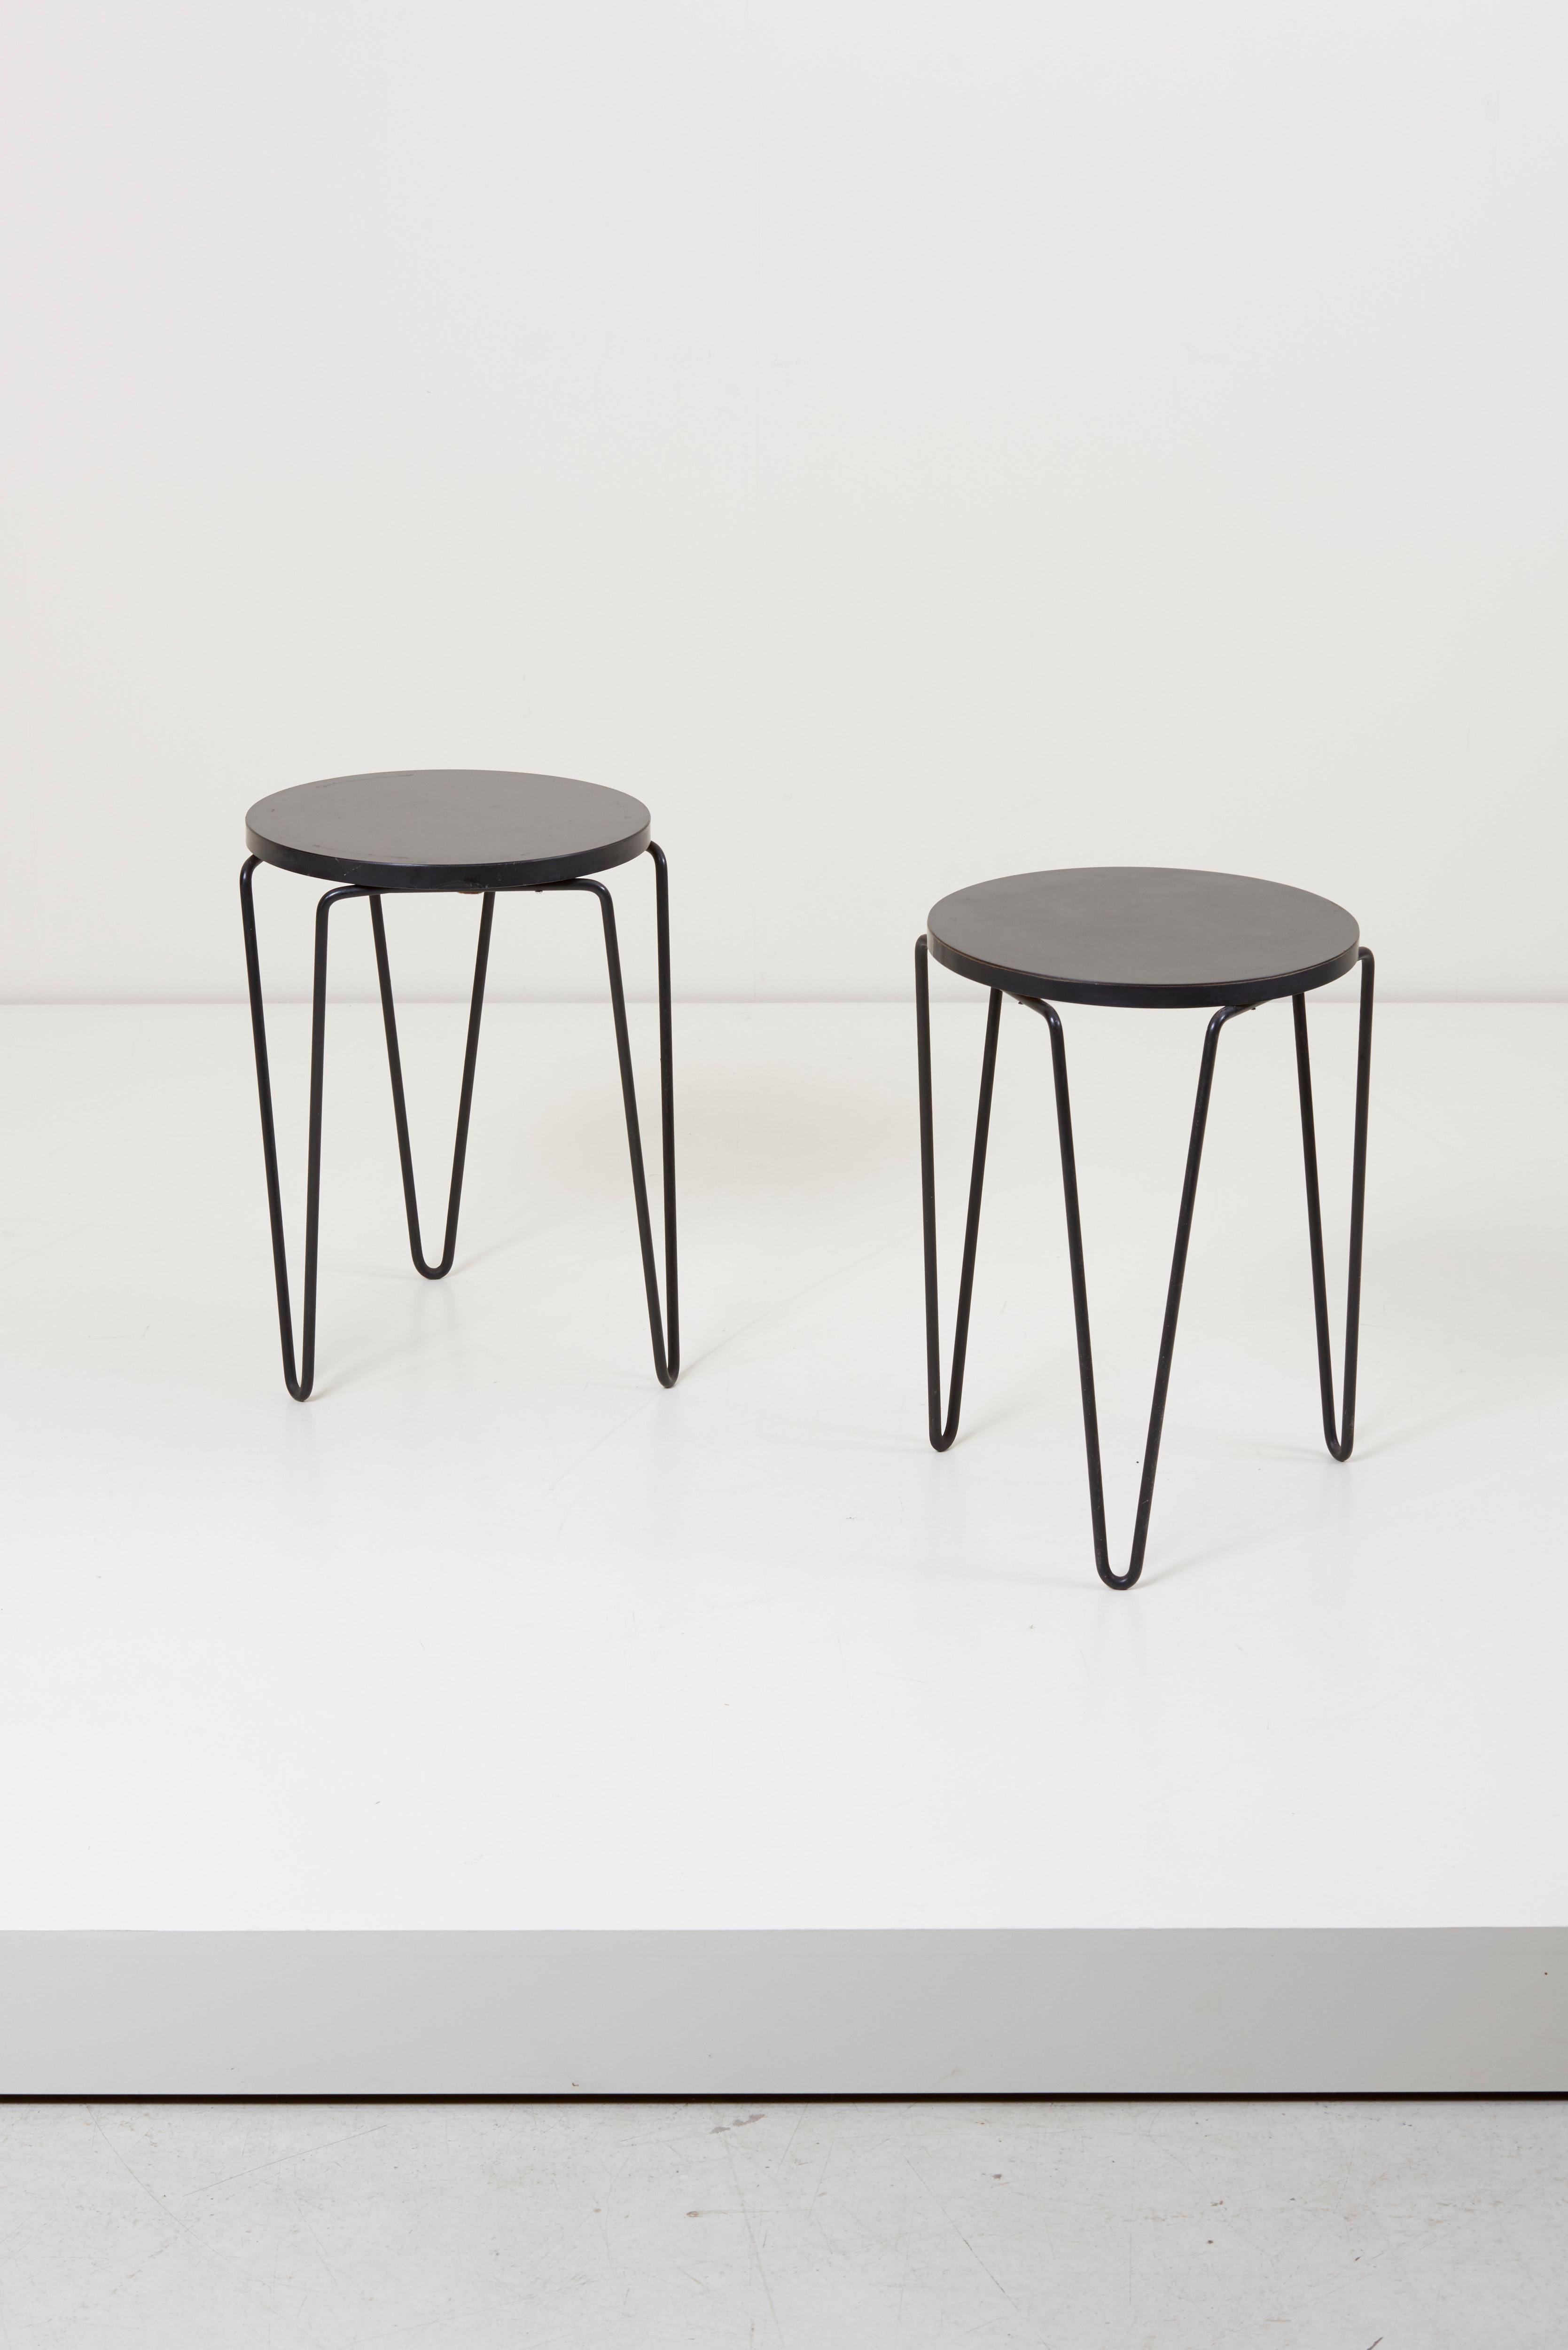 Pair of Classic three-legged stools or side tables with round top and lacquered wrought iron hairpin legs designed by Florence Knoll.